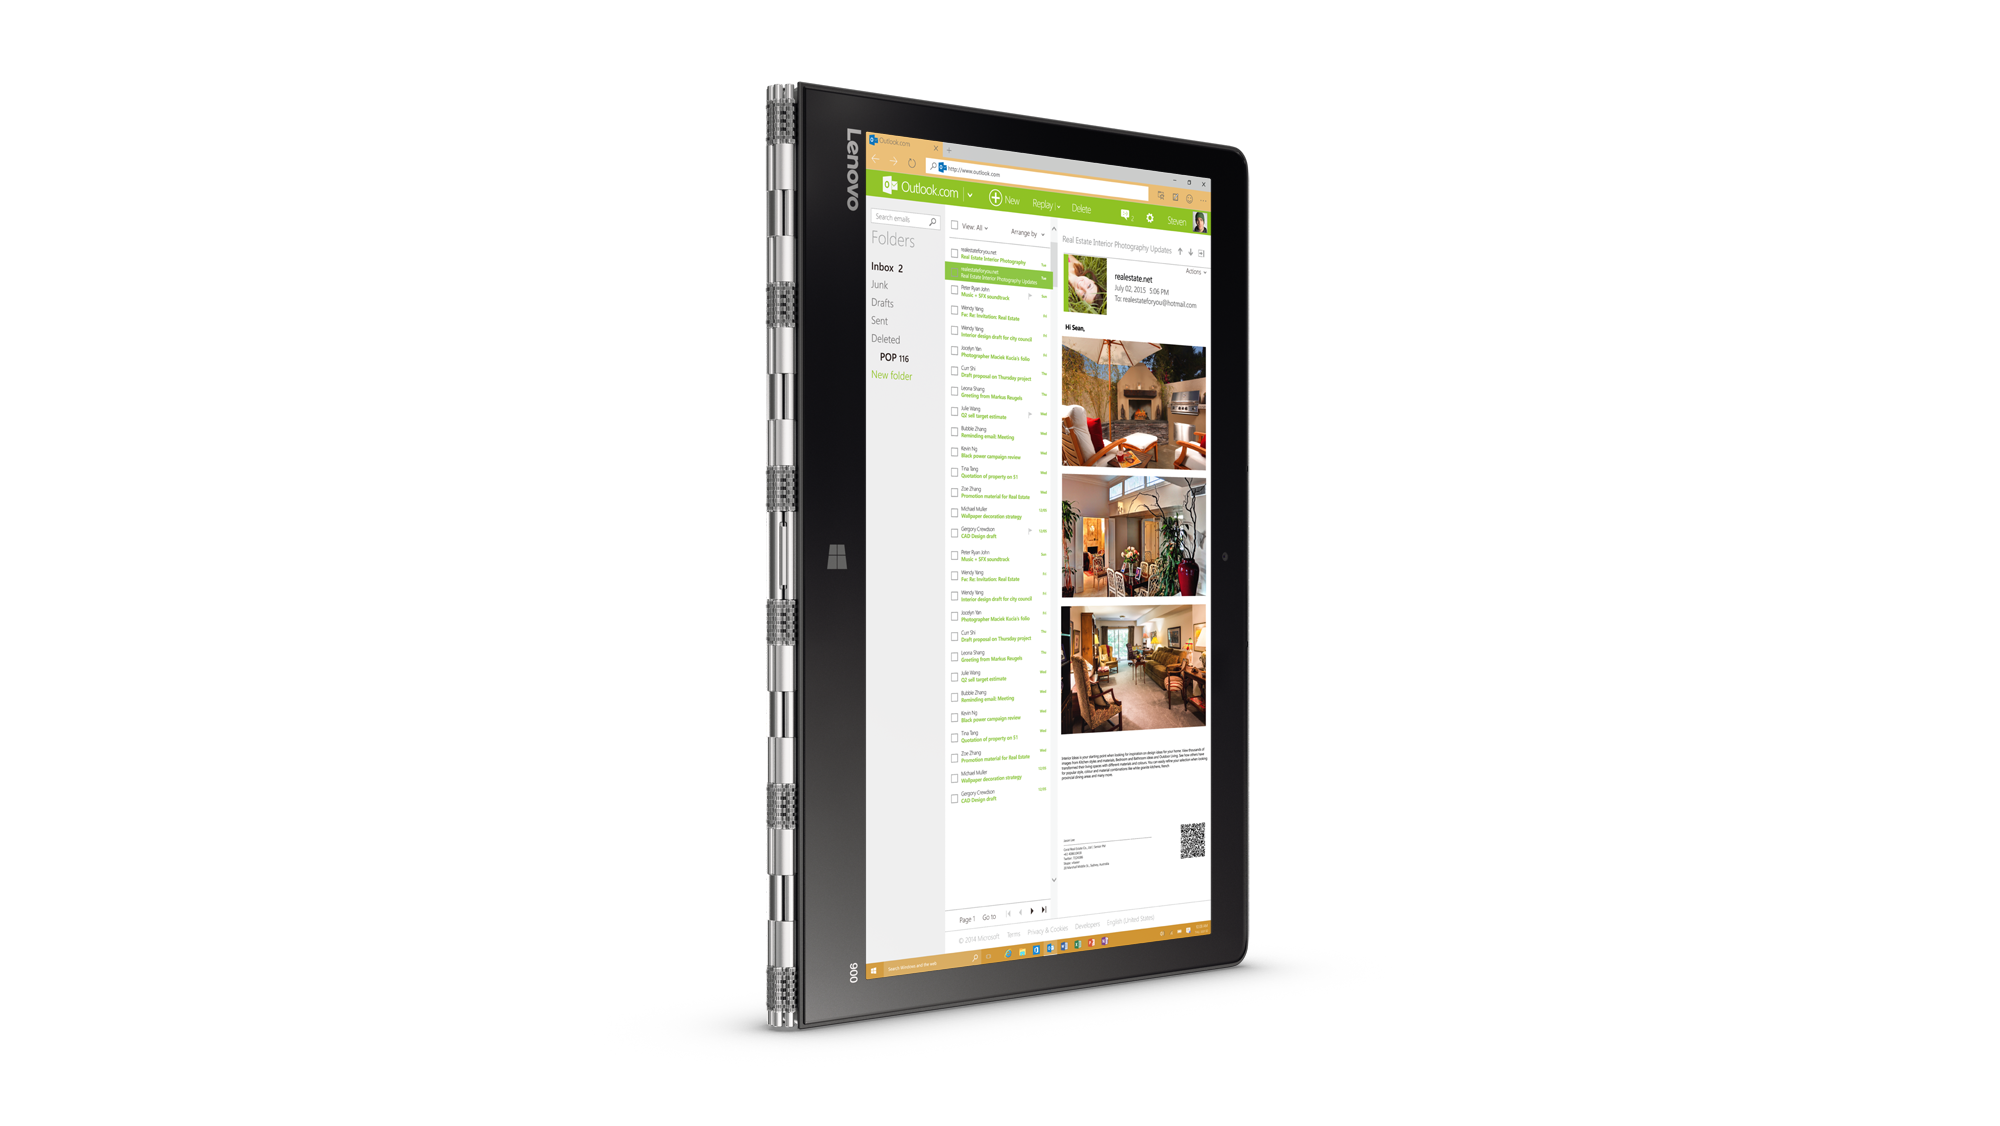 Lenovo Gets Flexible With Windows Powered Yoga Laptops And Pcs